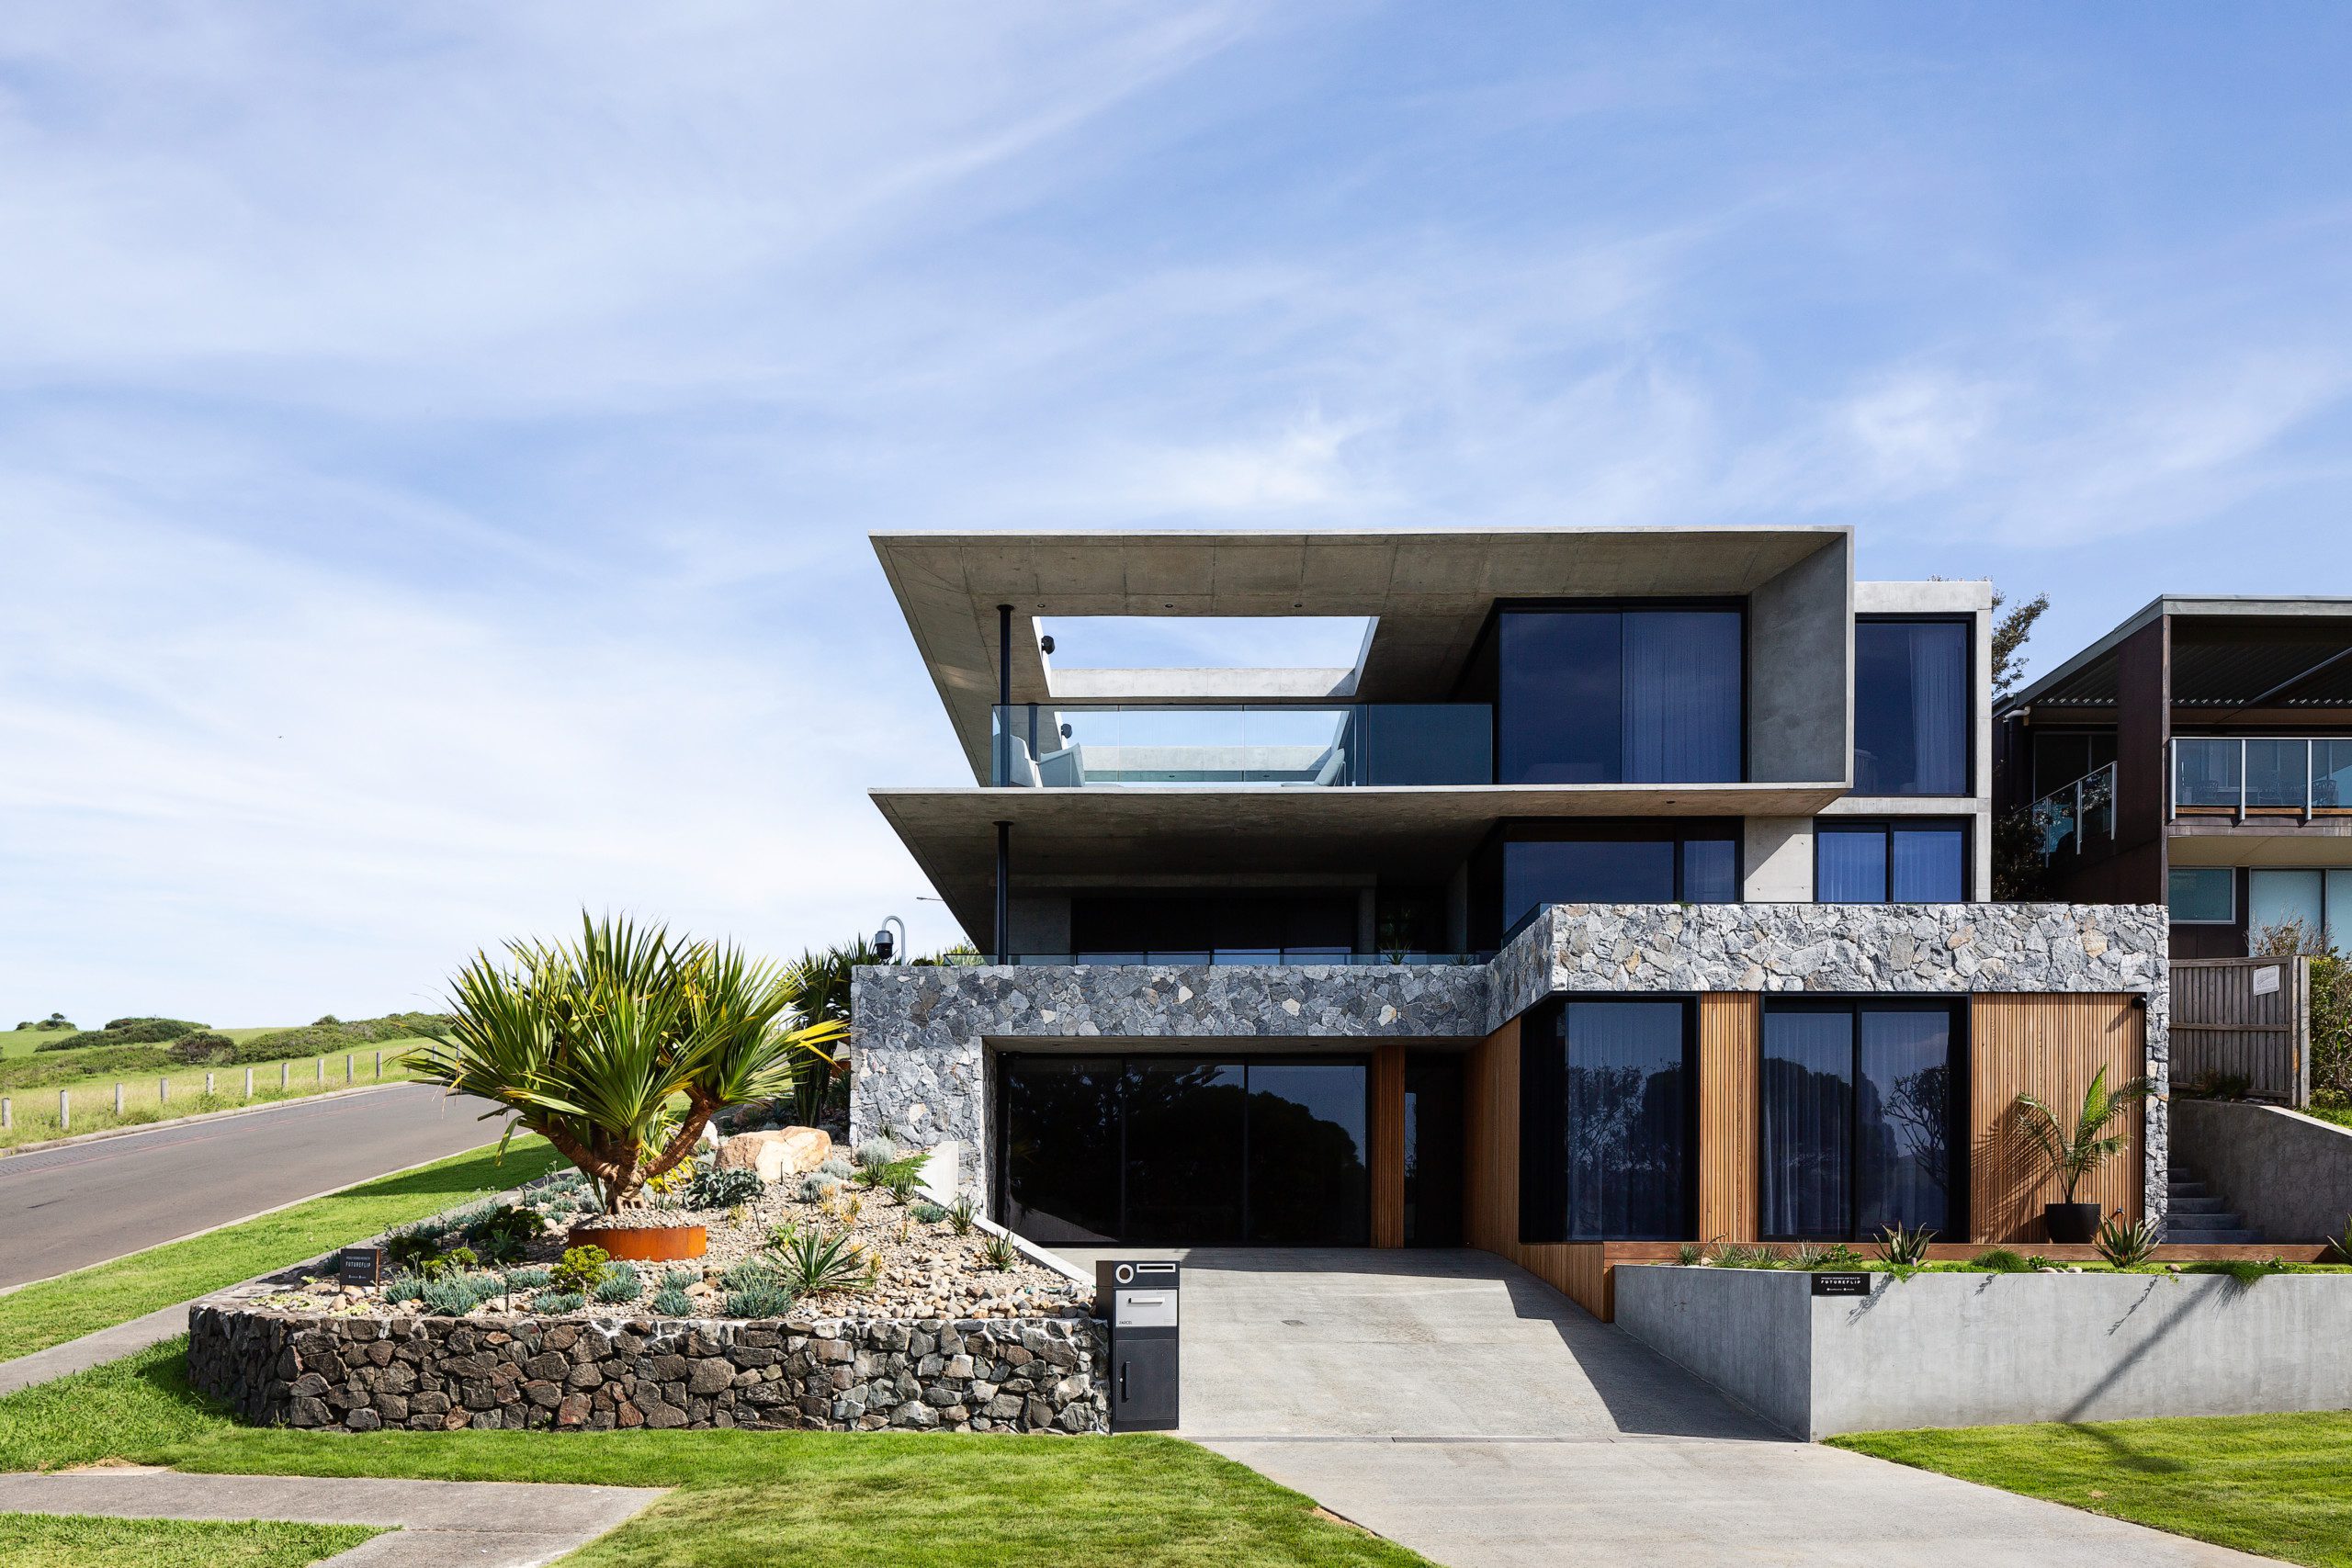 Contemporary, concrete showstopper by the beach